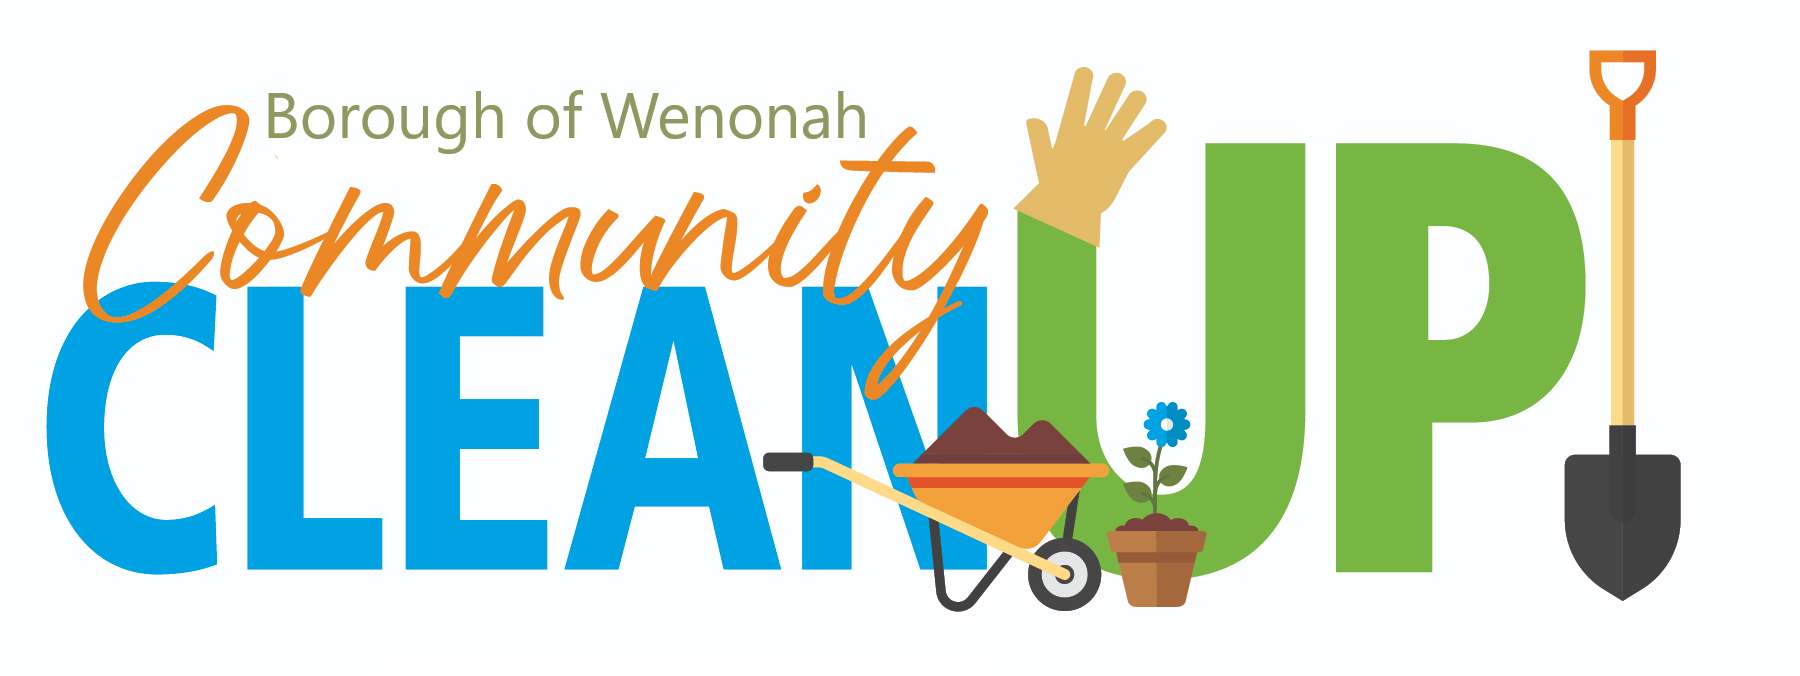 Clean Community Day Saturday May 11th